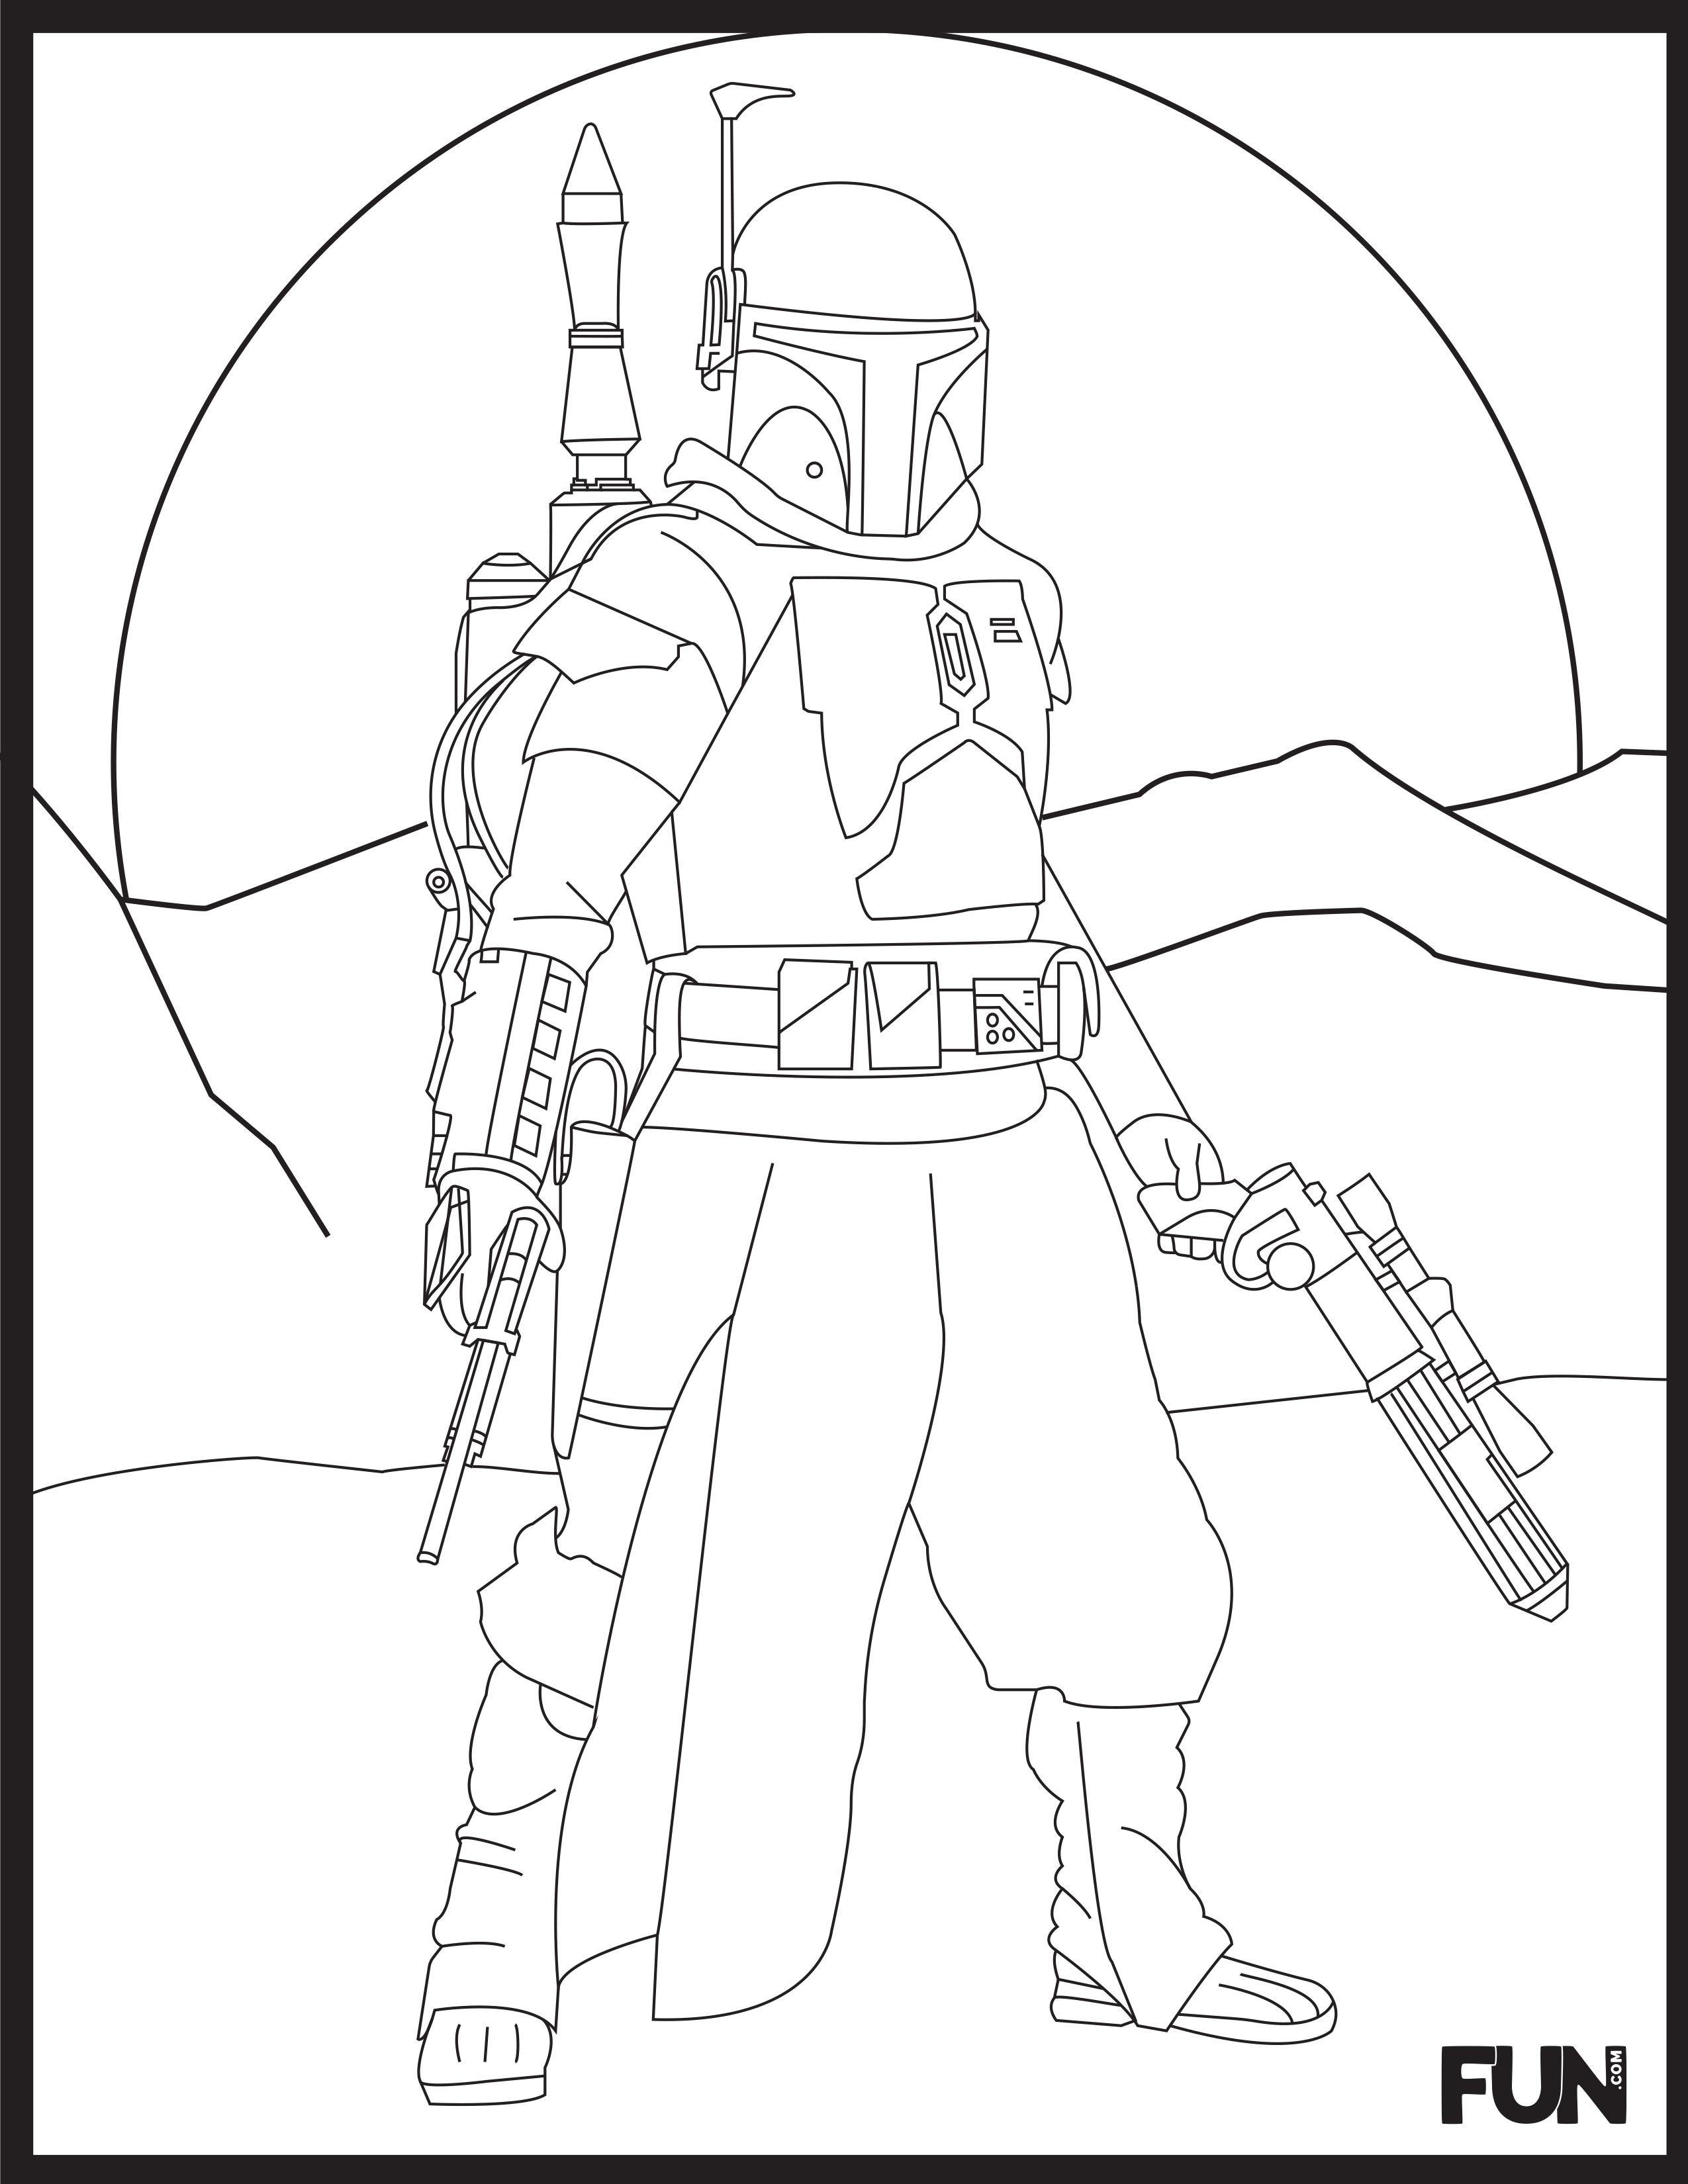 Star Wars Coloring Pages and Bingo Sheets   FUN.com Blog